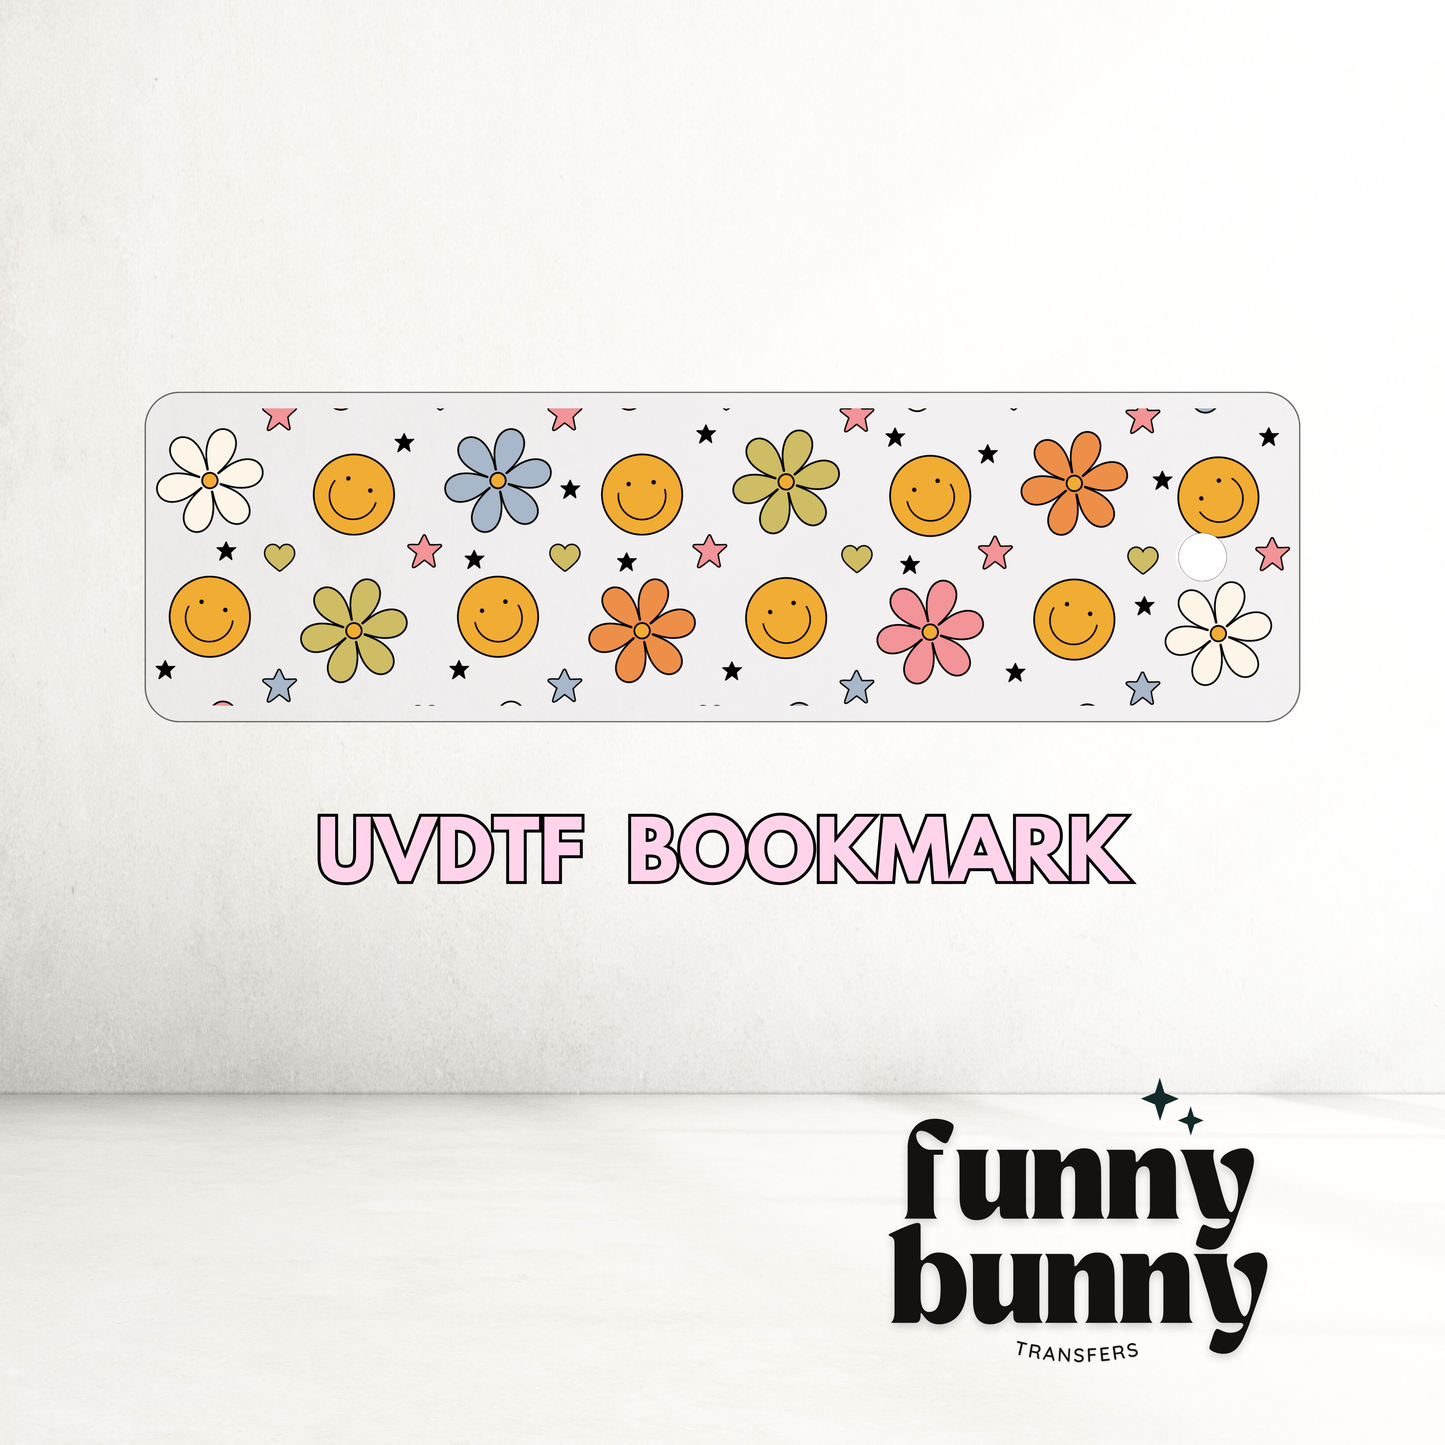 Groovy Smiles - UVDTF Bookmark Decal